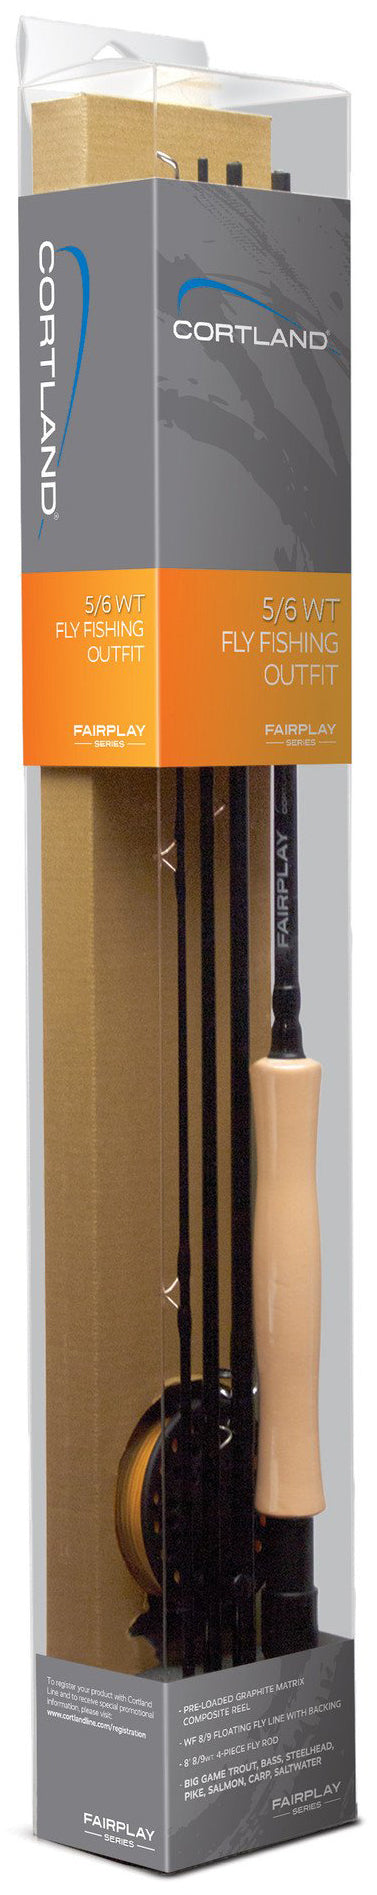 Cortland Fairplay Outfit Kit 9ft  8/9# Rod  inc Reel & Line